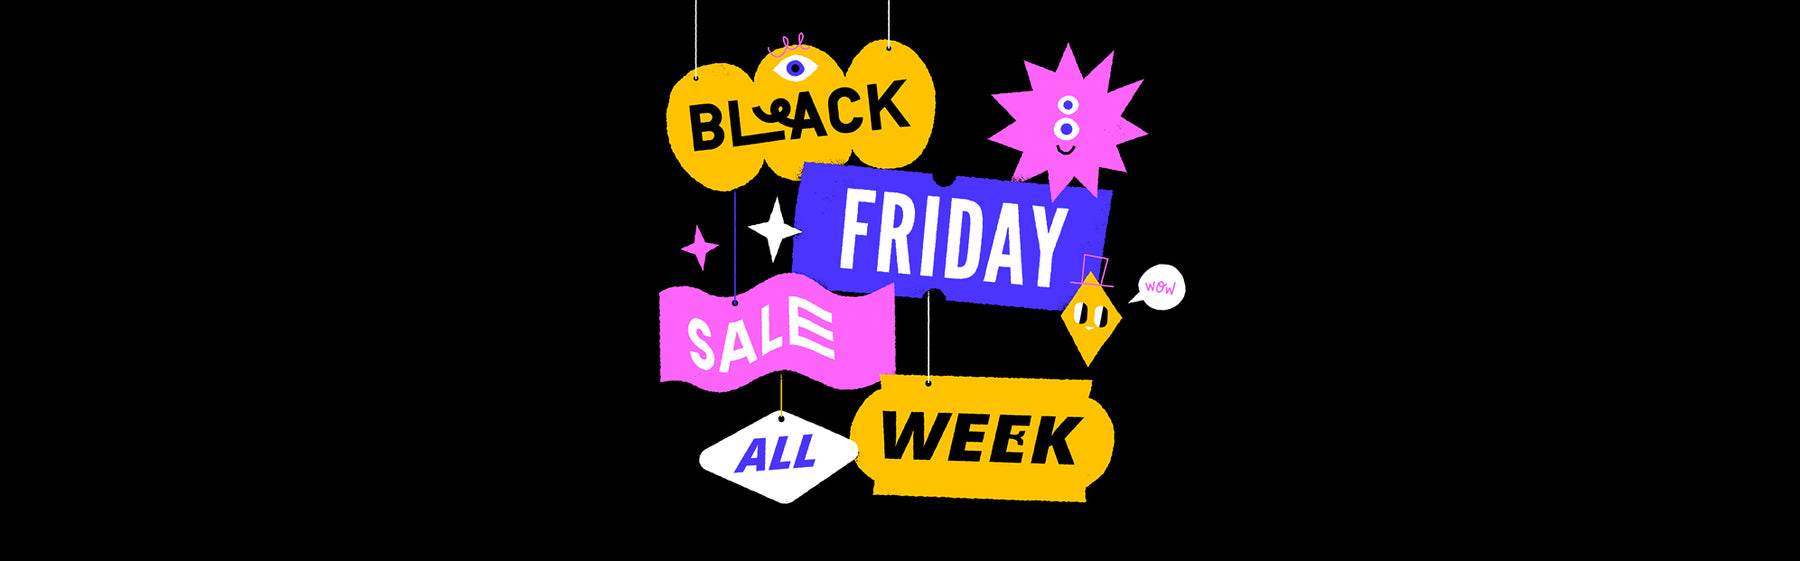 Your Black Friday Discount is ready!